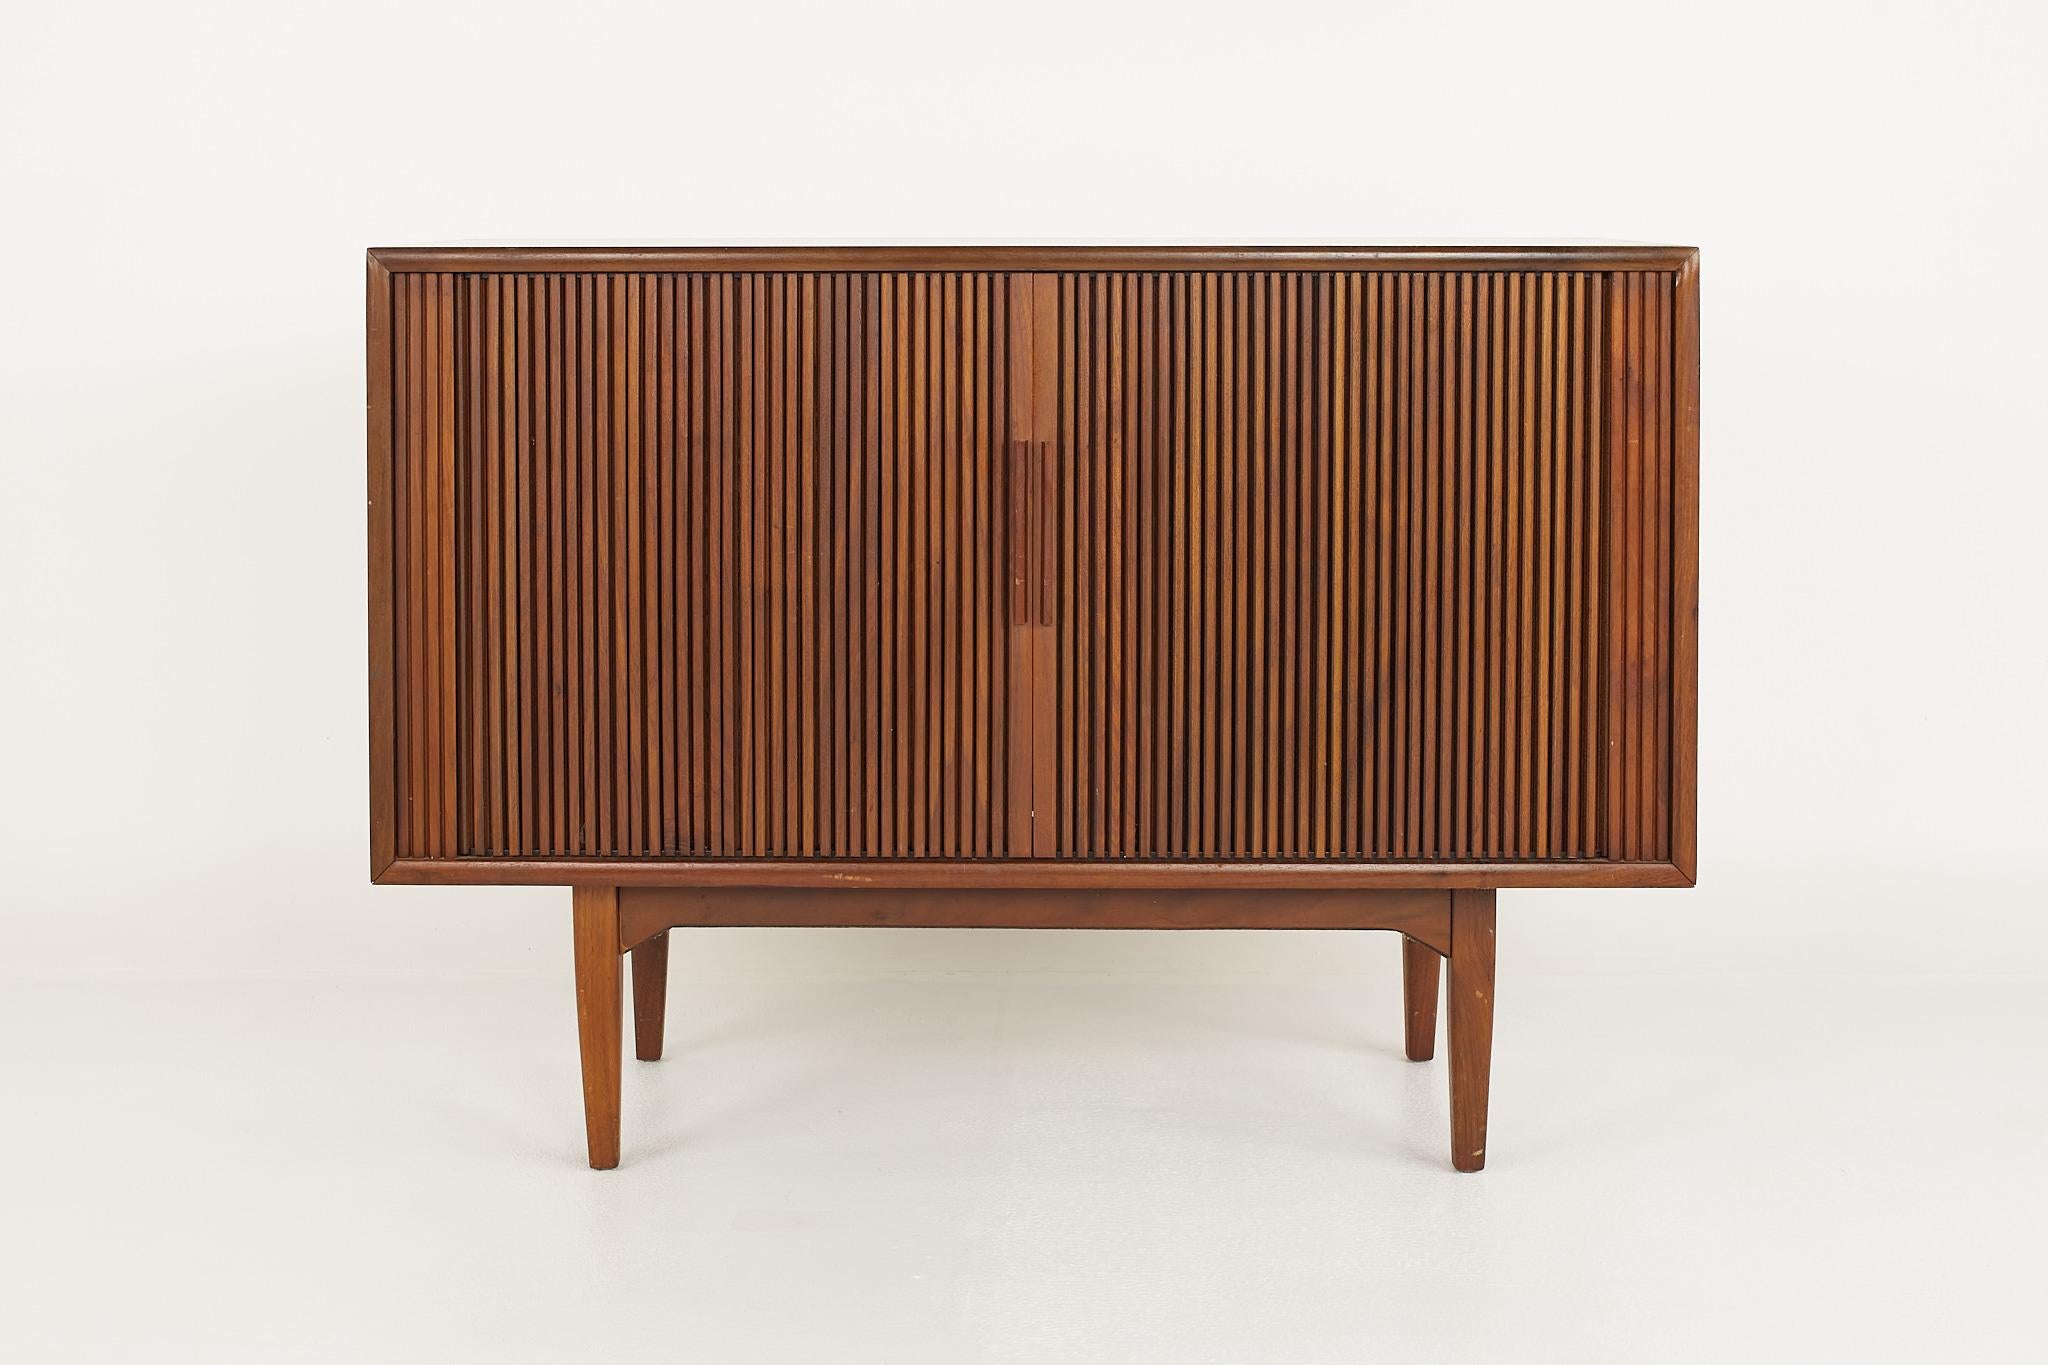 Kipp Stewart for Drexel Declarations mid century walnut Tambour door TV media cabinet

This cabinet measures: 43.5 wide x 17.75 deep x 31.25 inches high

?All pieces of furniture can be had in what we call restored vintage condition. That means